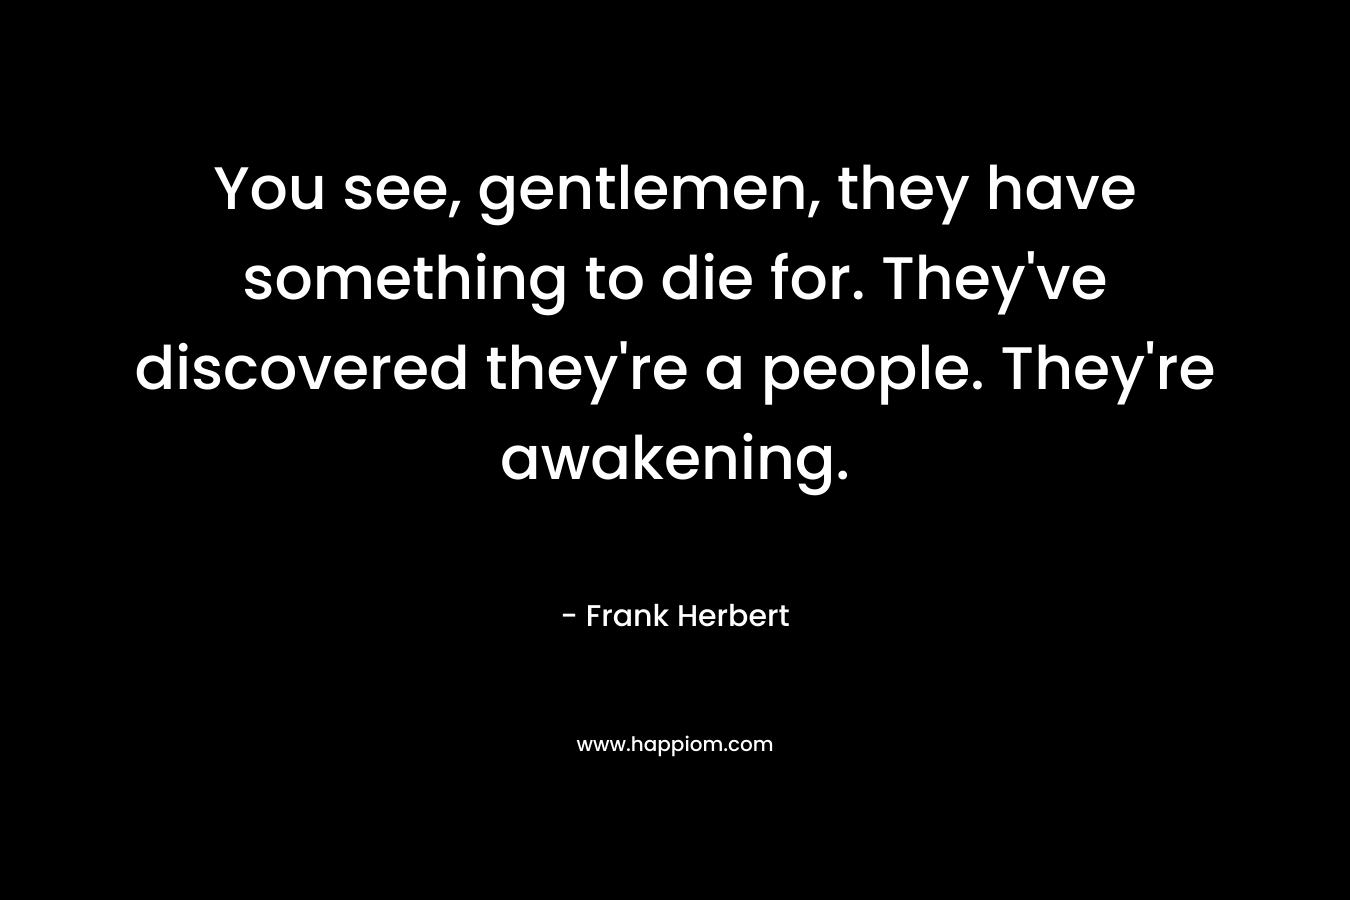 You see, gentlemen, they have something to die for. They’ve discovered they’re a people. They’re awakening. – Frank Herbert